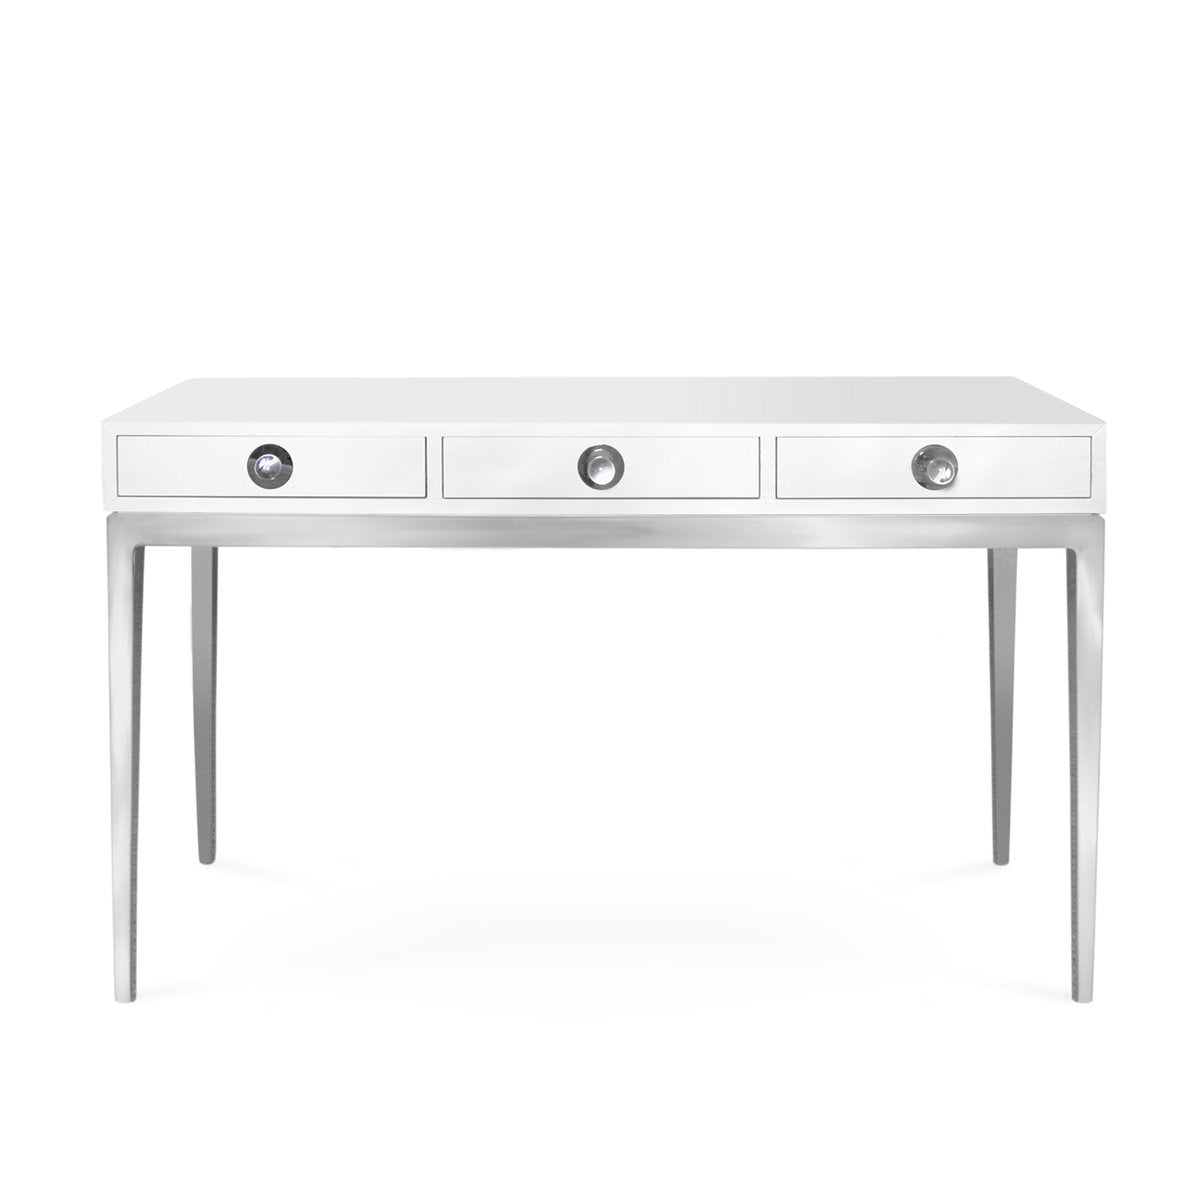 Load image into Gallery viewer, Channing Three-drawer Console White - NickelConsole Table Jonathan Adler  White - Nickel   Four Hands, Burke Decor, Mid Century Modern Furniture, Old Bones Furniture Company, Old Bones Co, Modern Mid Century, Designer Furniture, https://www.oldbonesco.com/
